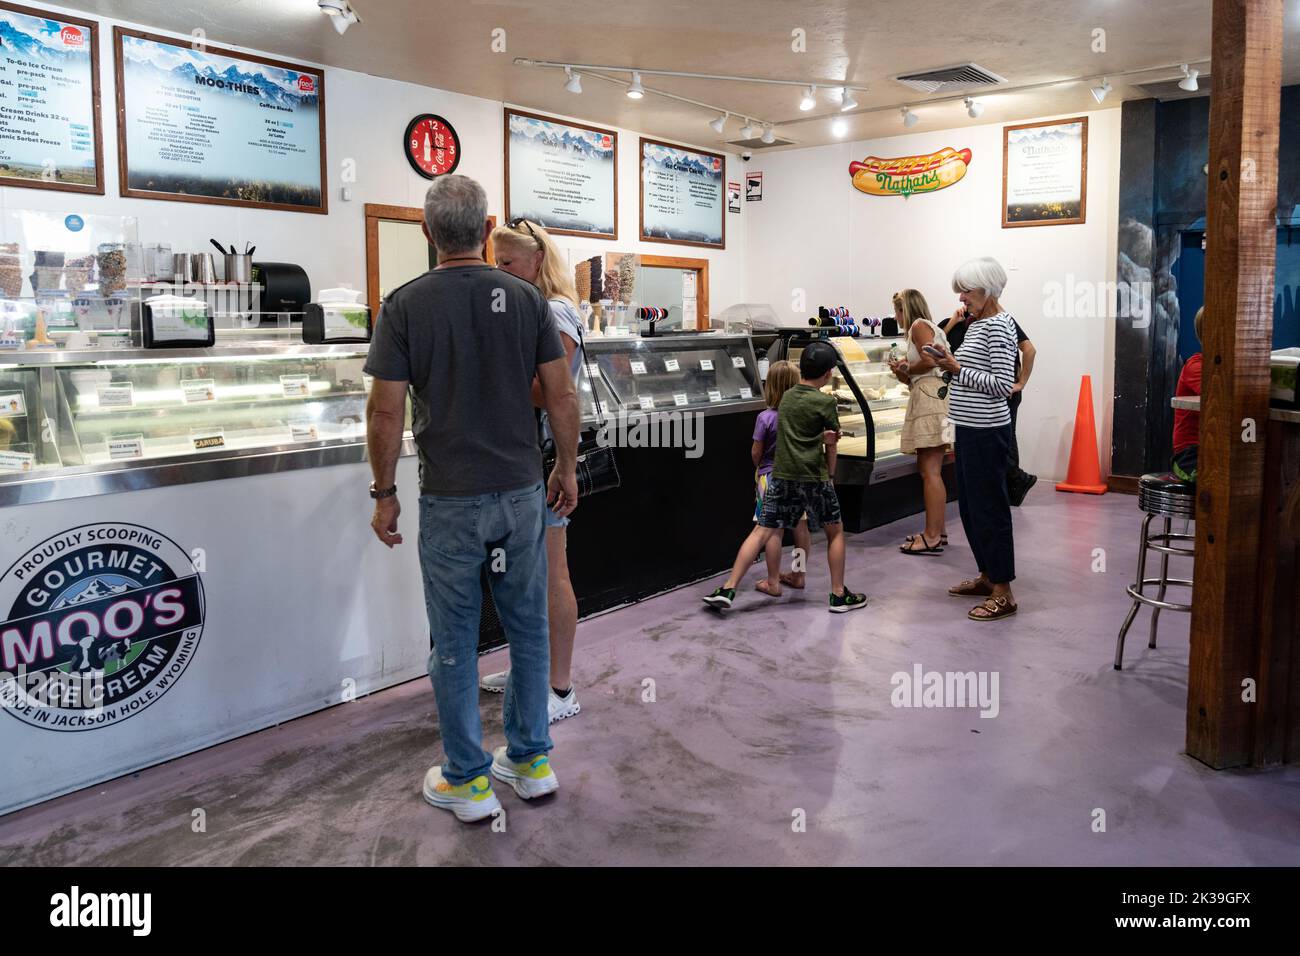 Jackson, Wyoming - July 20, 2022: Customers inside the Gourmet Moo's Ice Cream shop in downtown Jackson Stock Photo